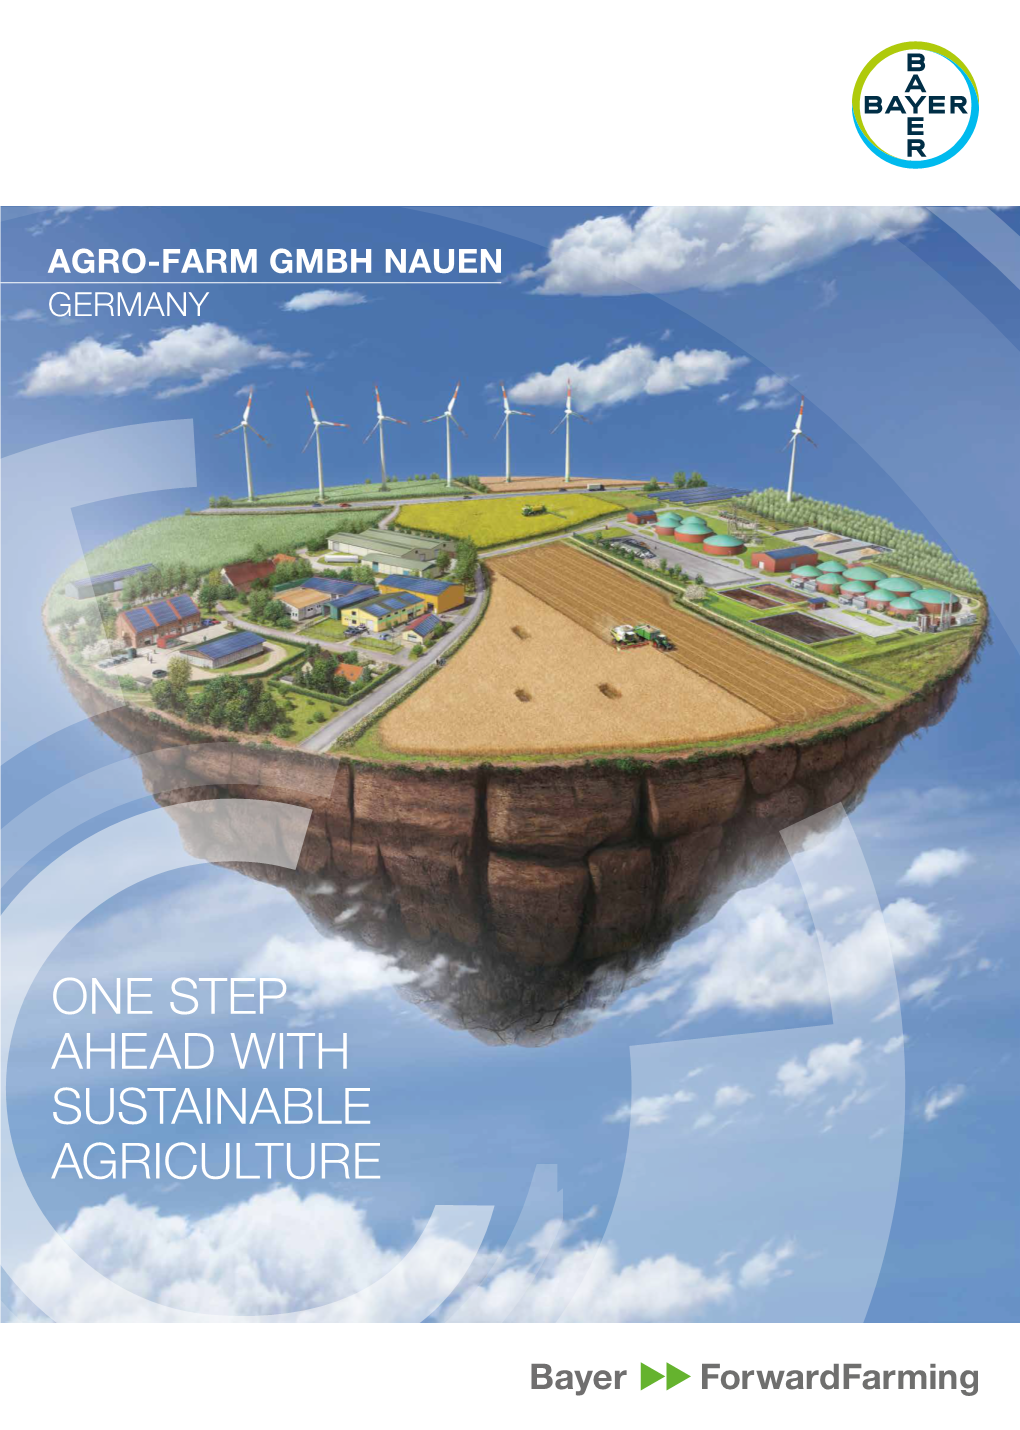 One Step Ahead with Sustainable Agriculture